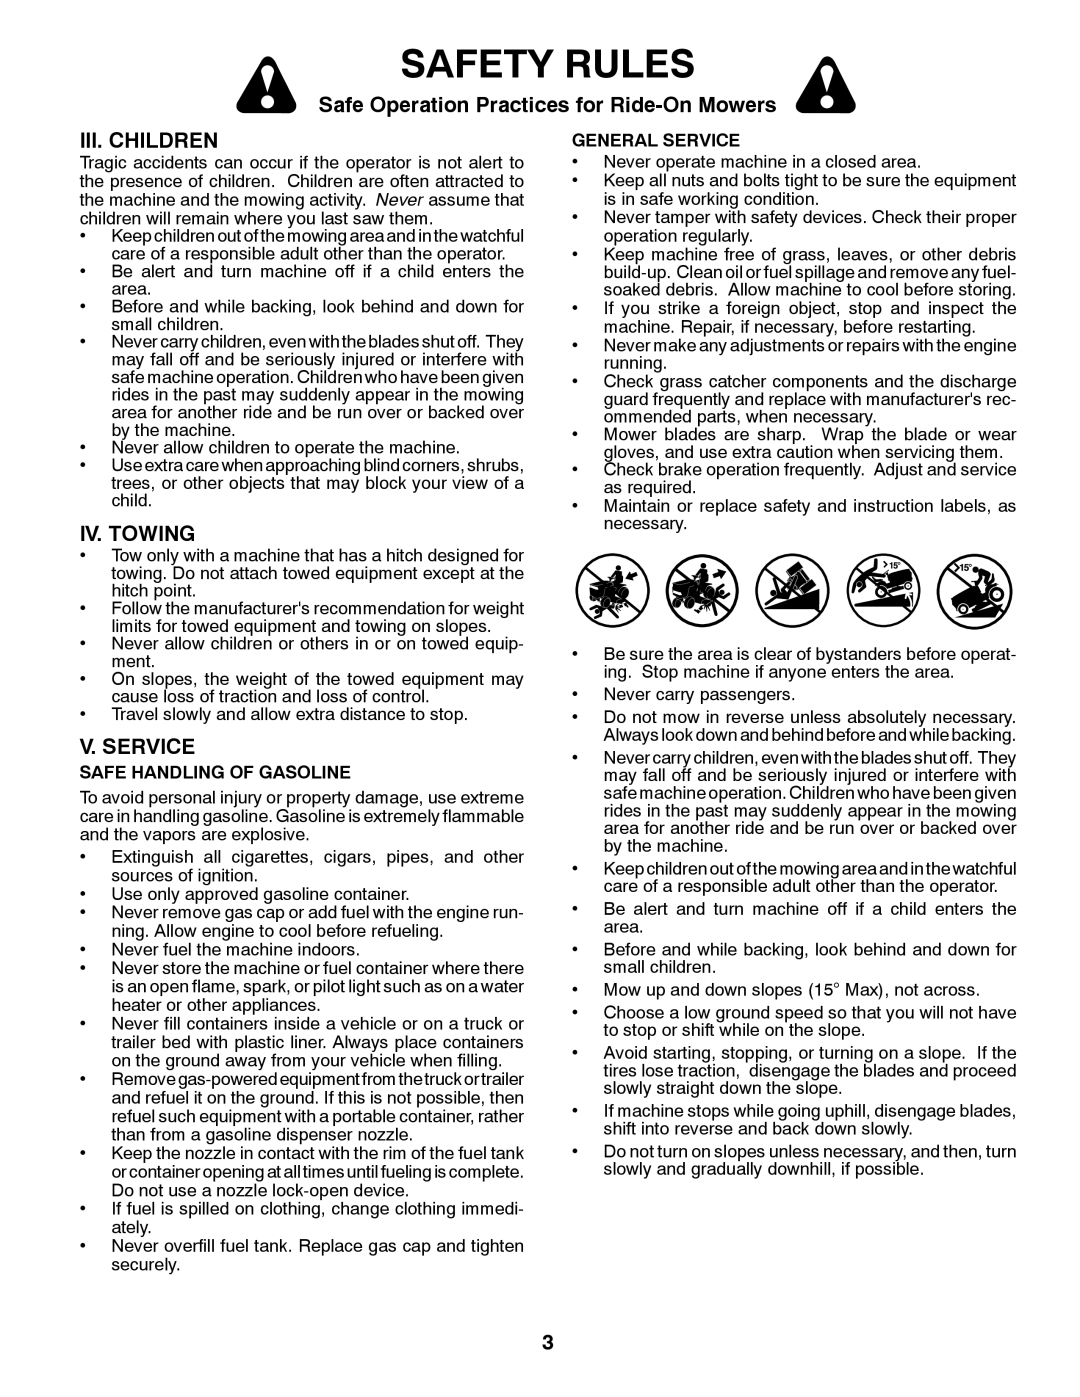 Poulan 96042010701 manual Safety Rules, Safe Operation Practices for Ride-On Mowers, Iii. Children, Iv. Towing, V. Service 